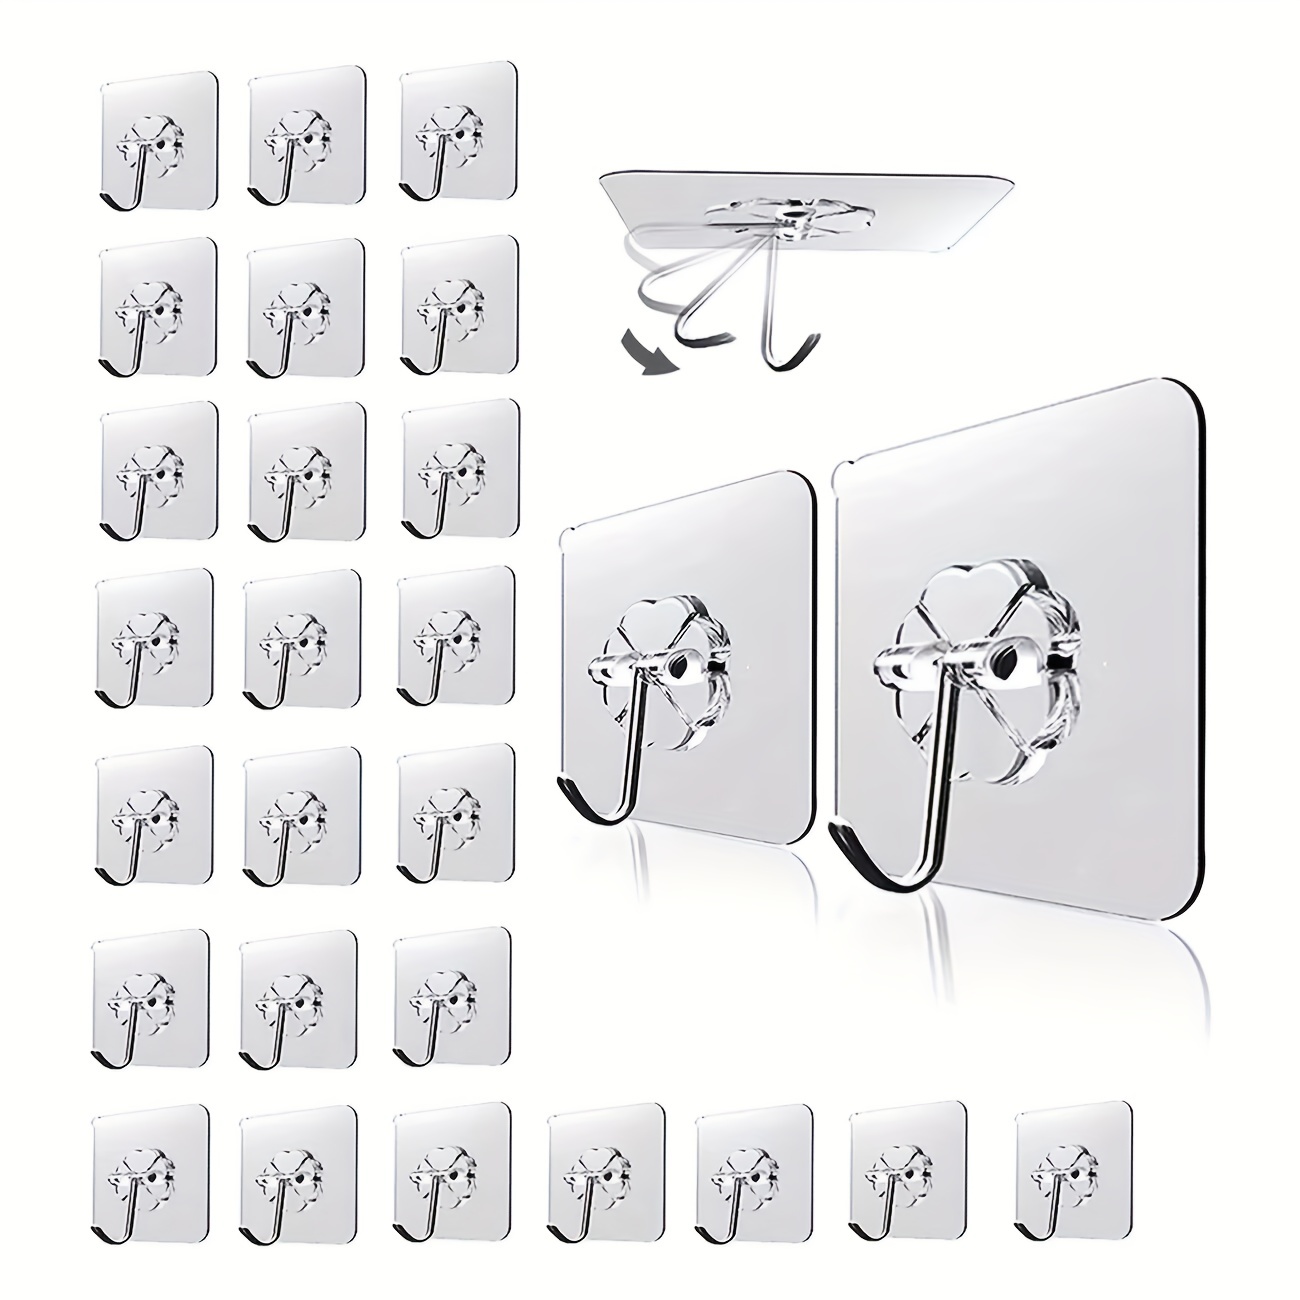 Adhesive tape Wall Hooks Hanger Strong Transparent Hooks Suction